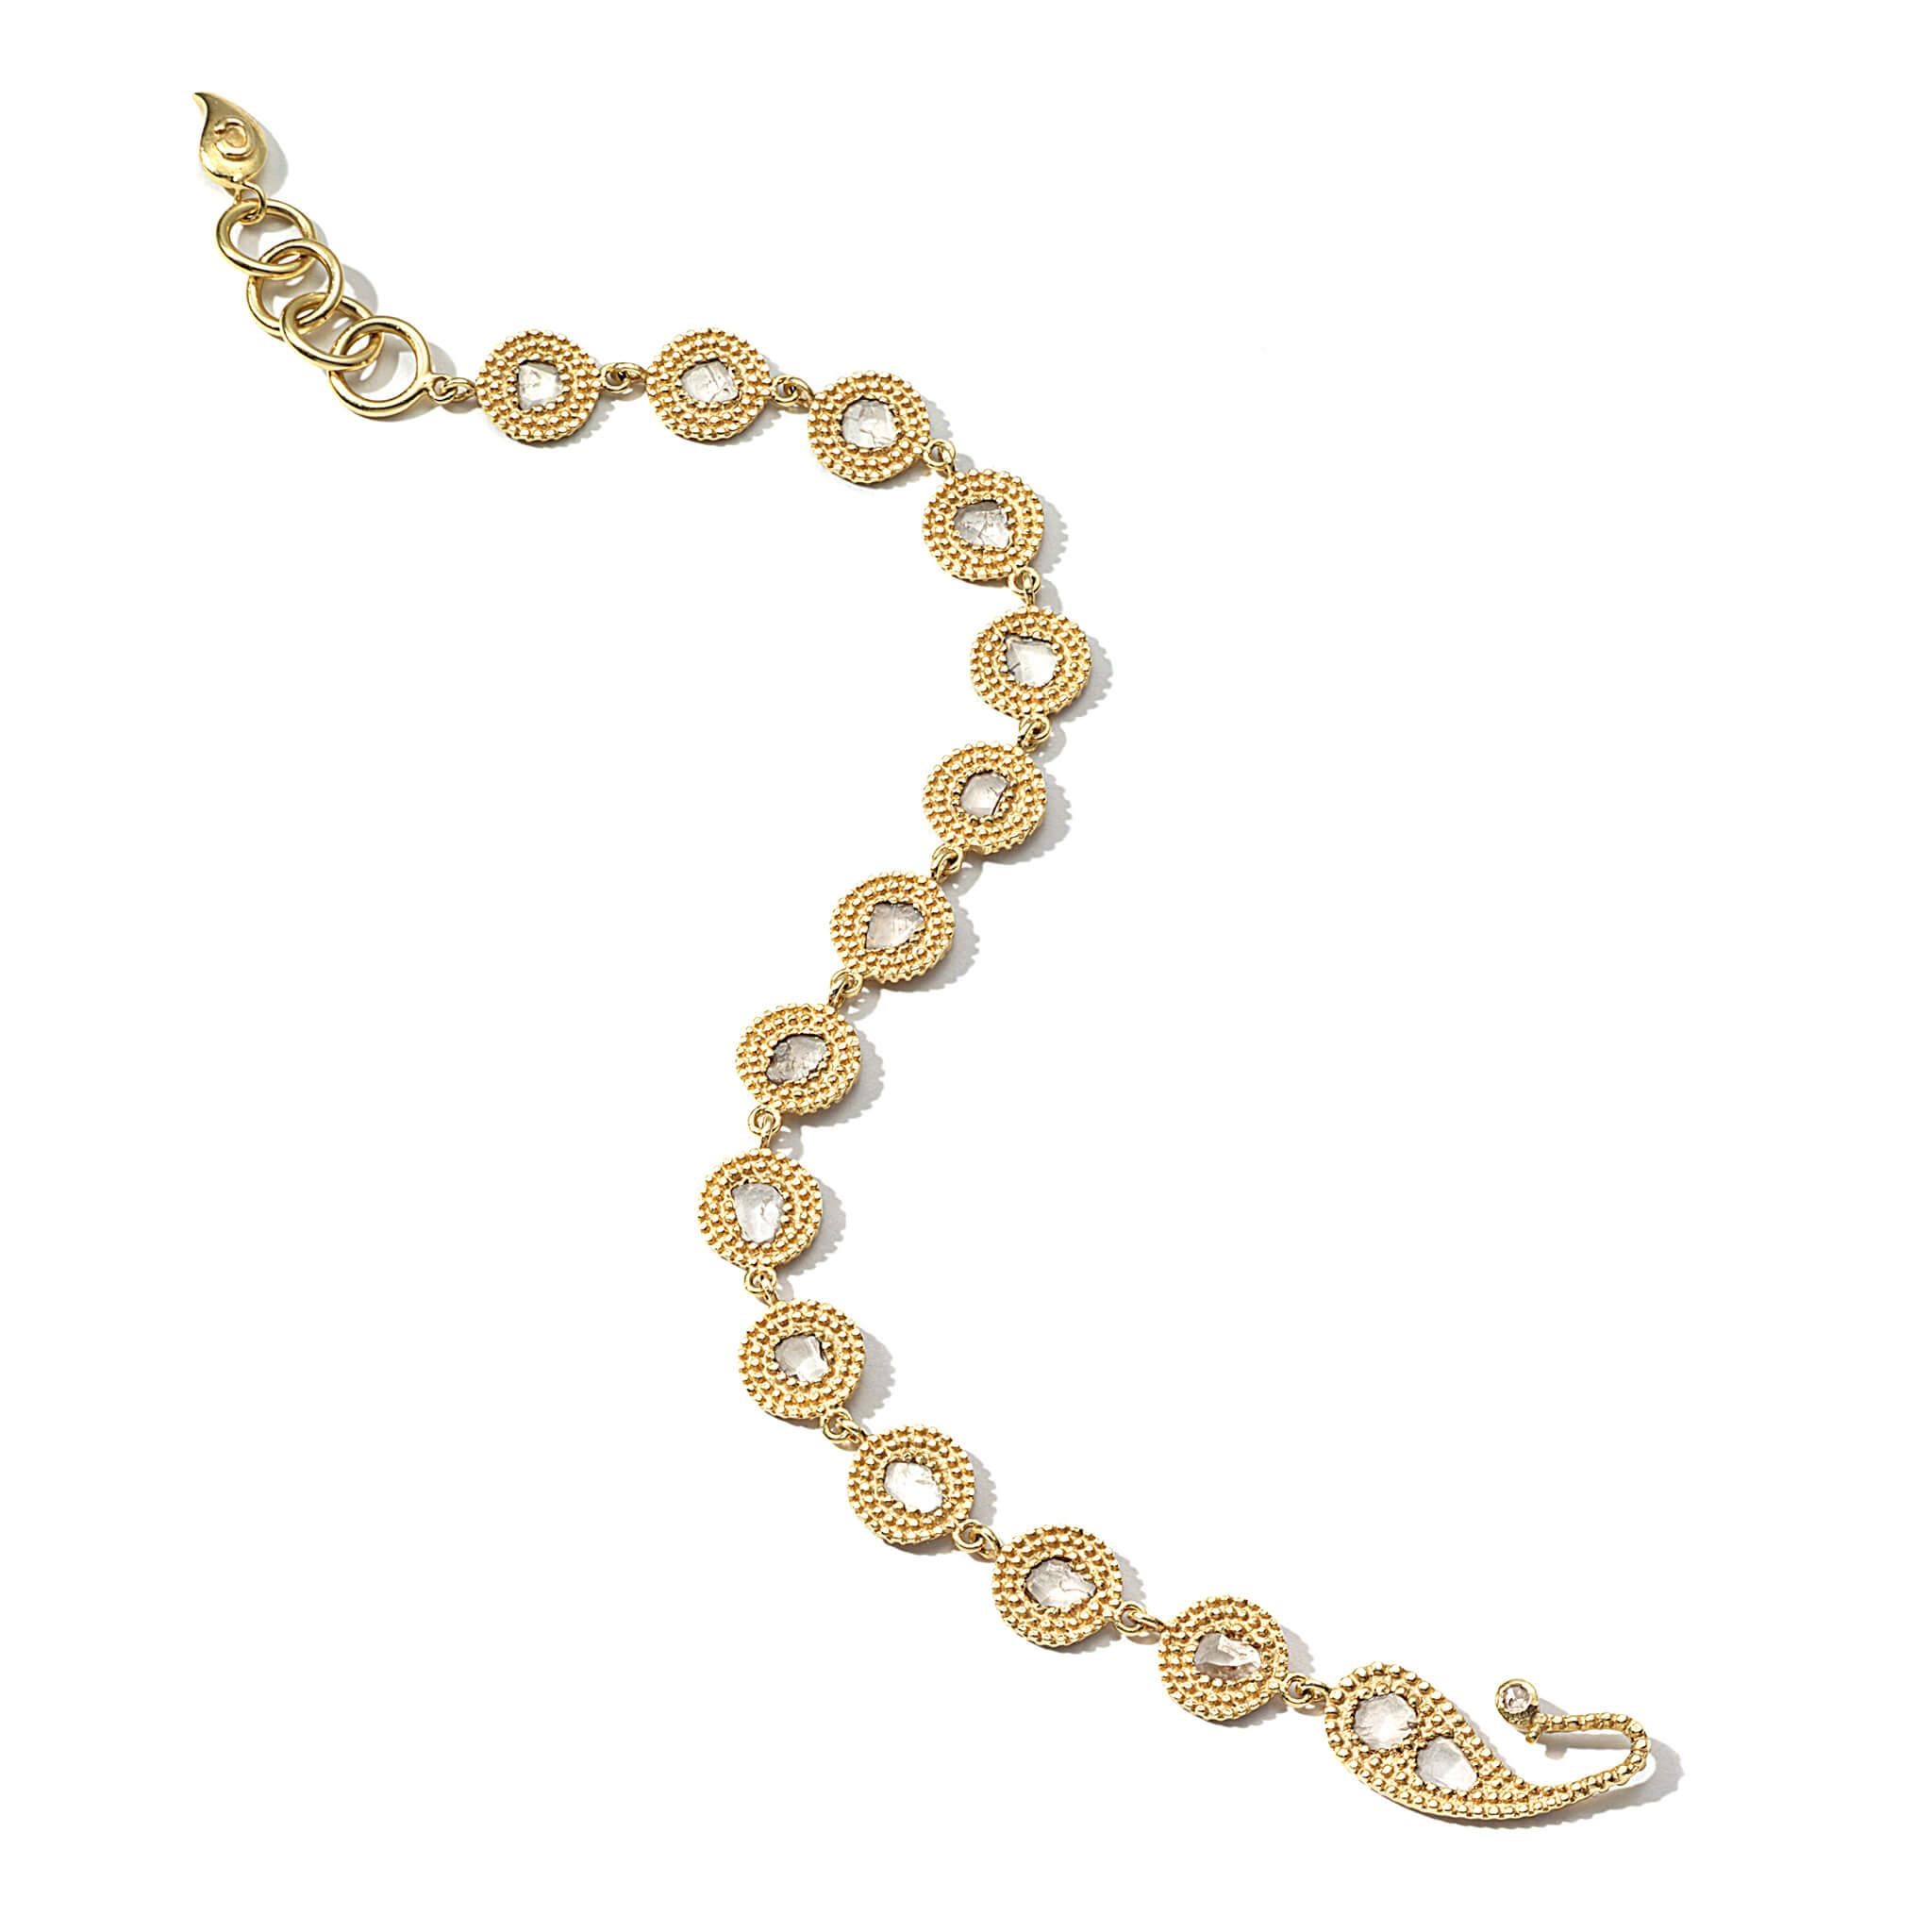 Coomi Eternity link bracelet set in 20K yellow gold with 1.11cts diamonds. Measures 7 inches with 1 inch extender, total 8 inches in length.

Coomi’s Eternity Collection is inspired by continuity and wholeness represented by the immortal idea of